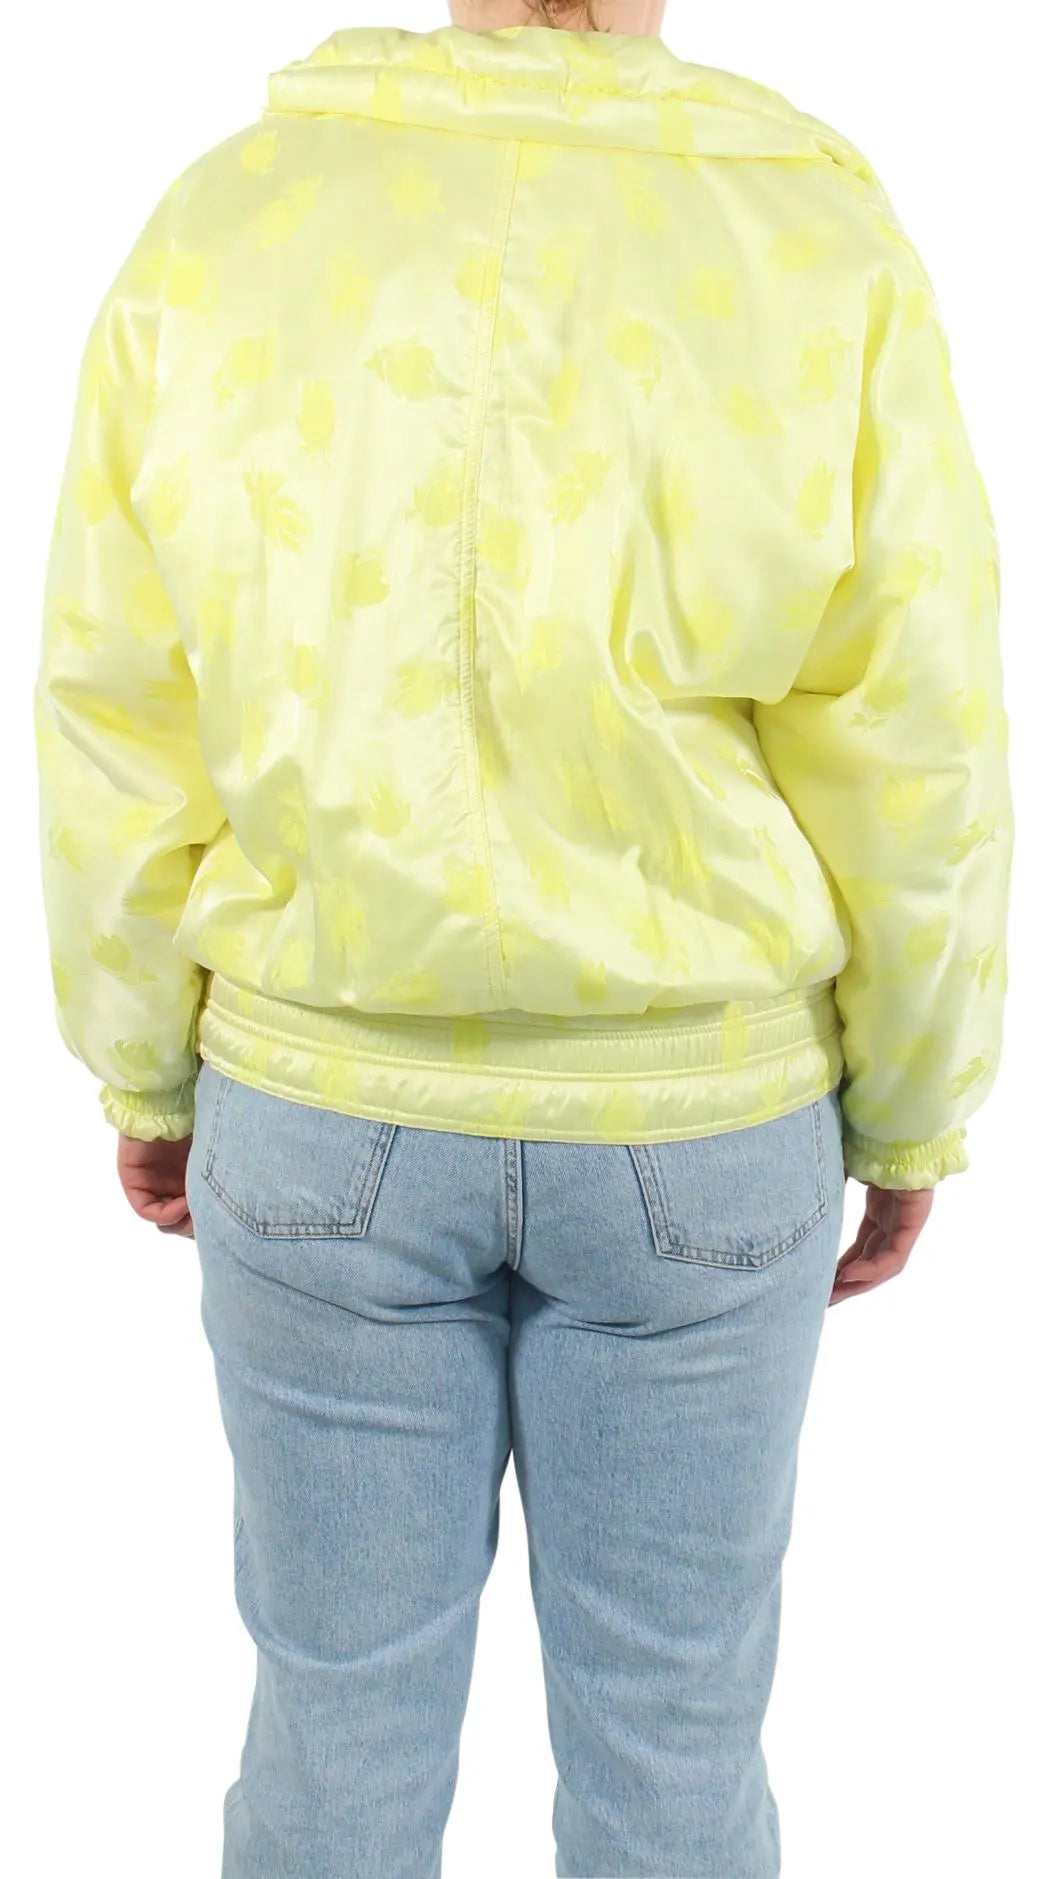 Luhta - Yellow Puffer Ski Jacket- ThriftTale.com - Vintage and second handclothing